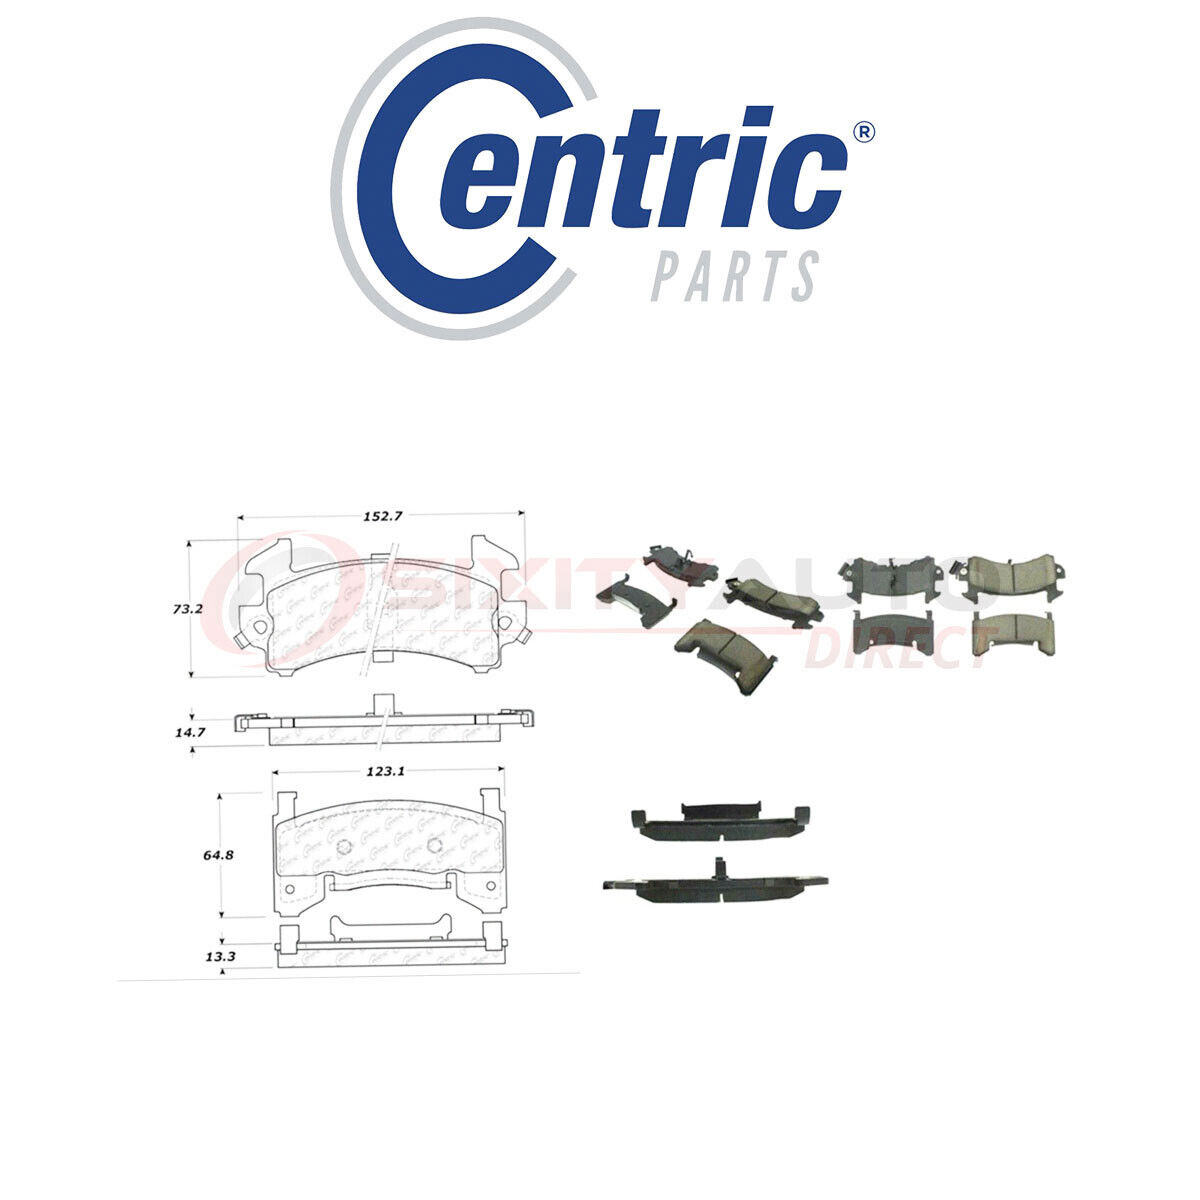 Centric Posi Quiet Disc Brake Pads w Shims for 1978-1988 Oldsmobile Cutlass yr